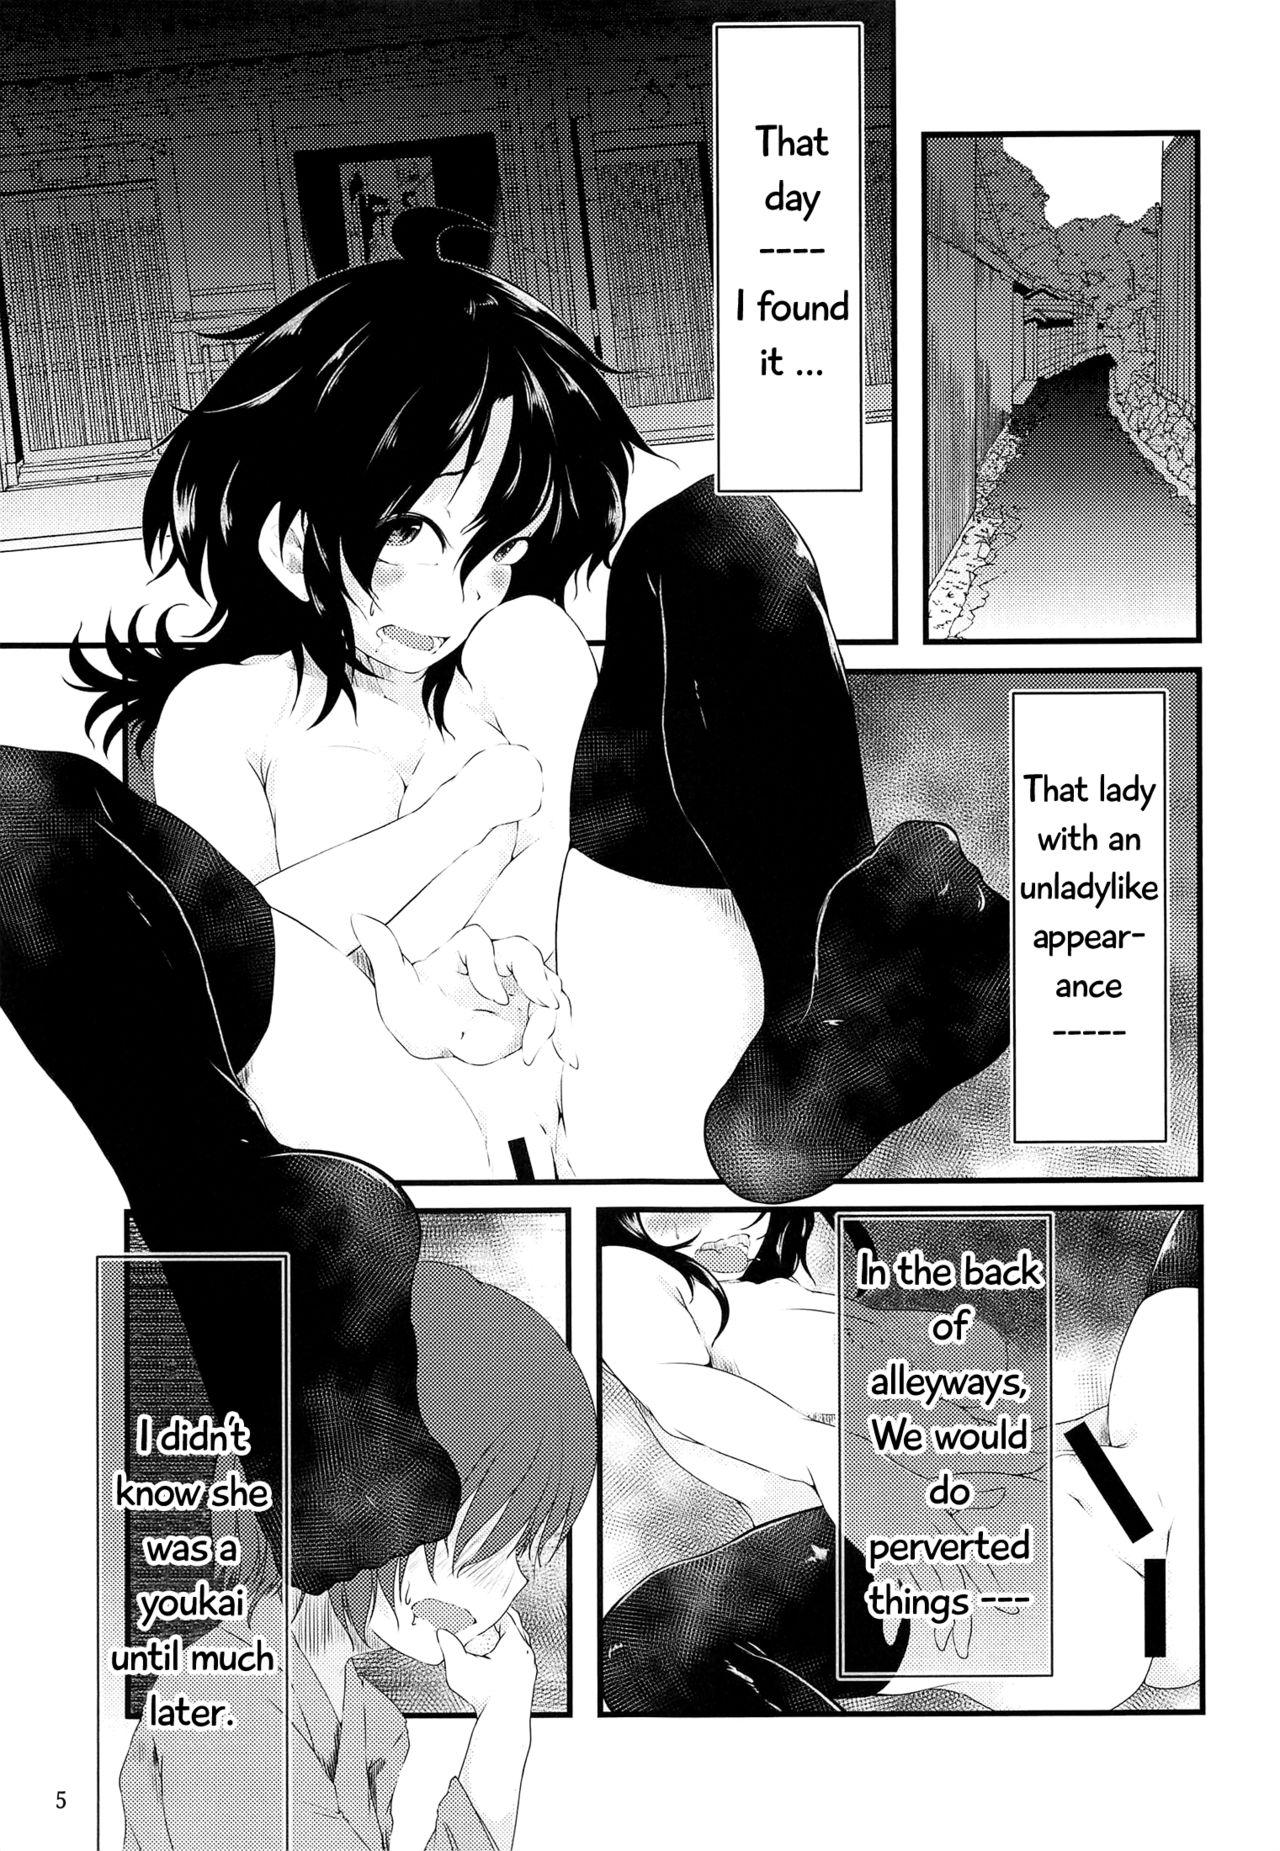 Nue-chan's Exposed Shame Instruction 2